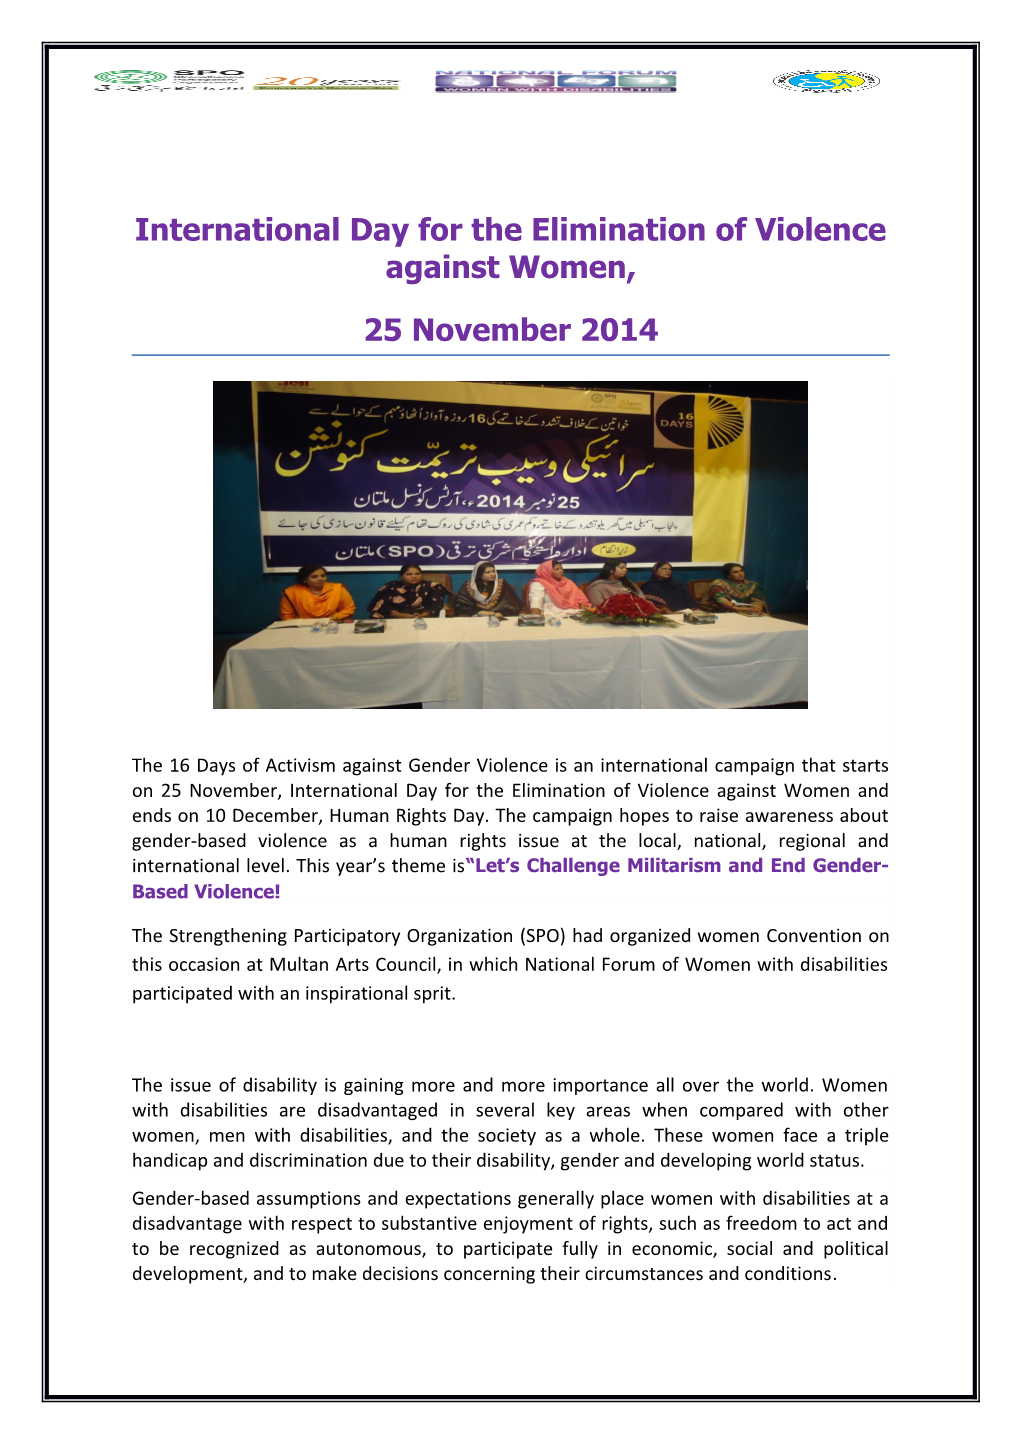 International Day for the Elimination of Violence Against Women